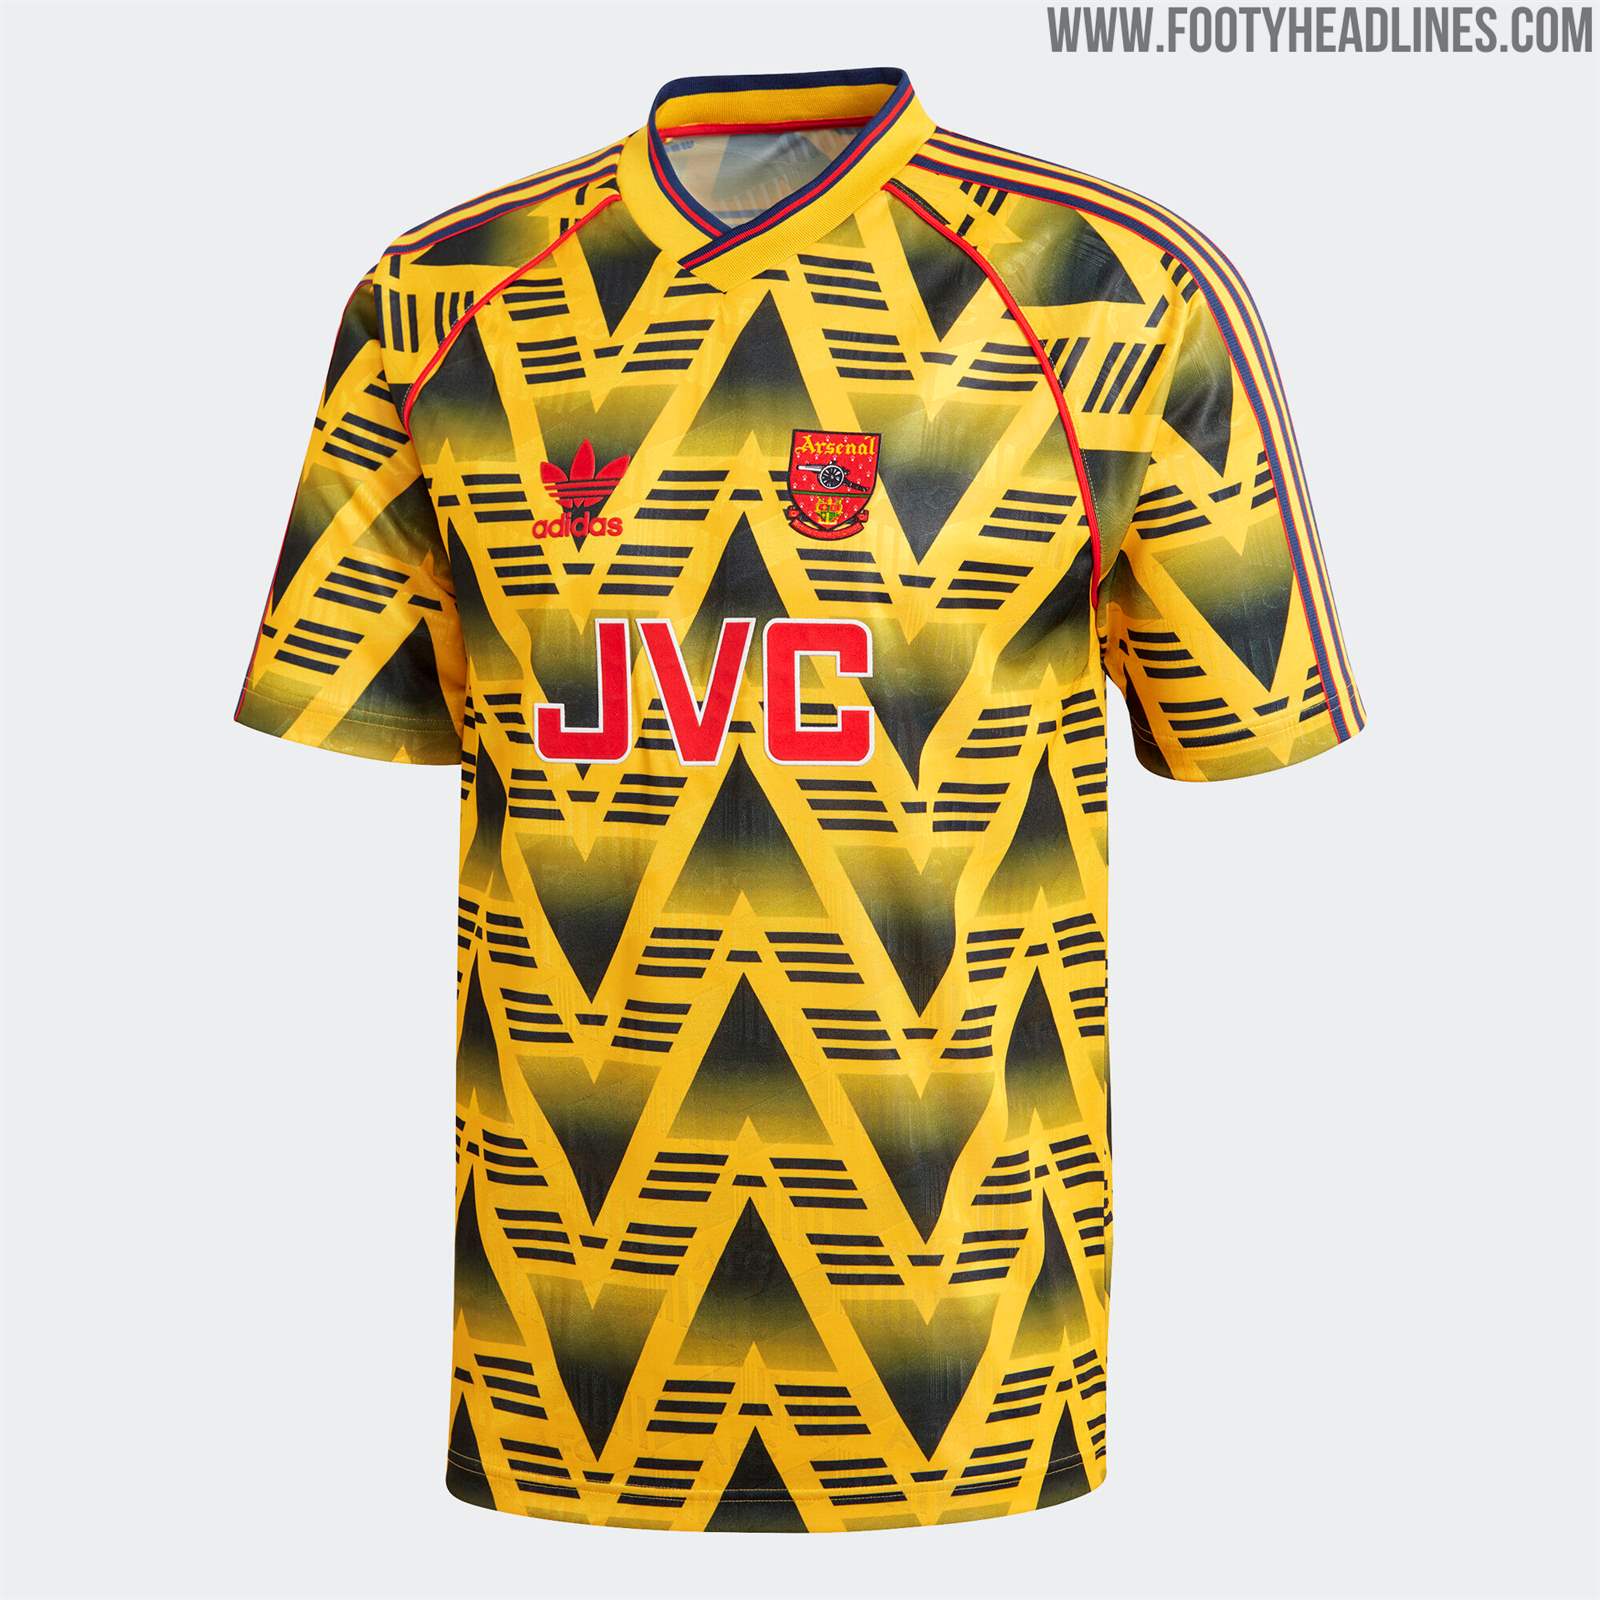 Arsenal fans are fuming after vintage adidas 'Bruised Banana' kit is  relaunched but costs a whopping £75 – The Sun